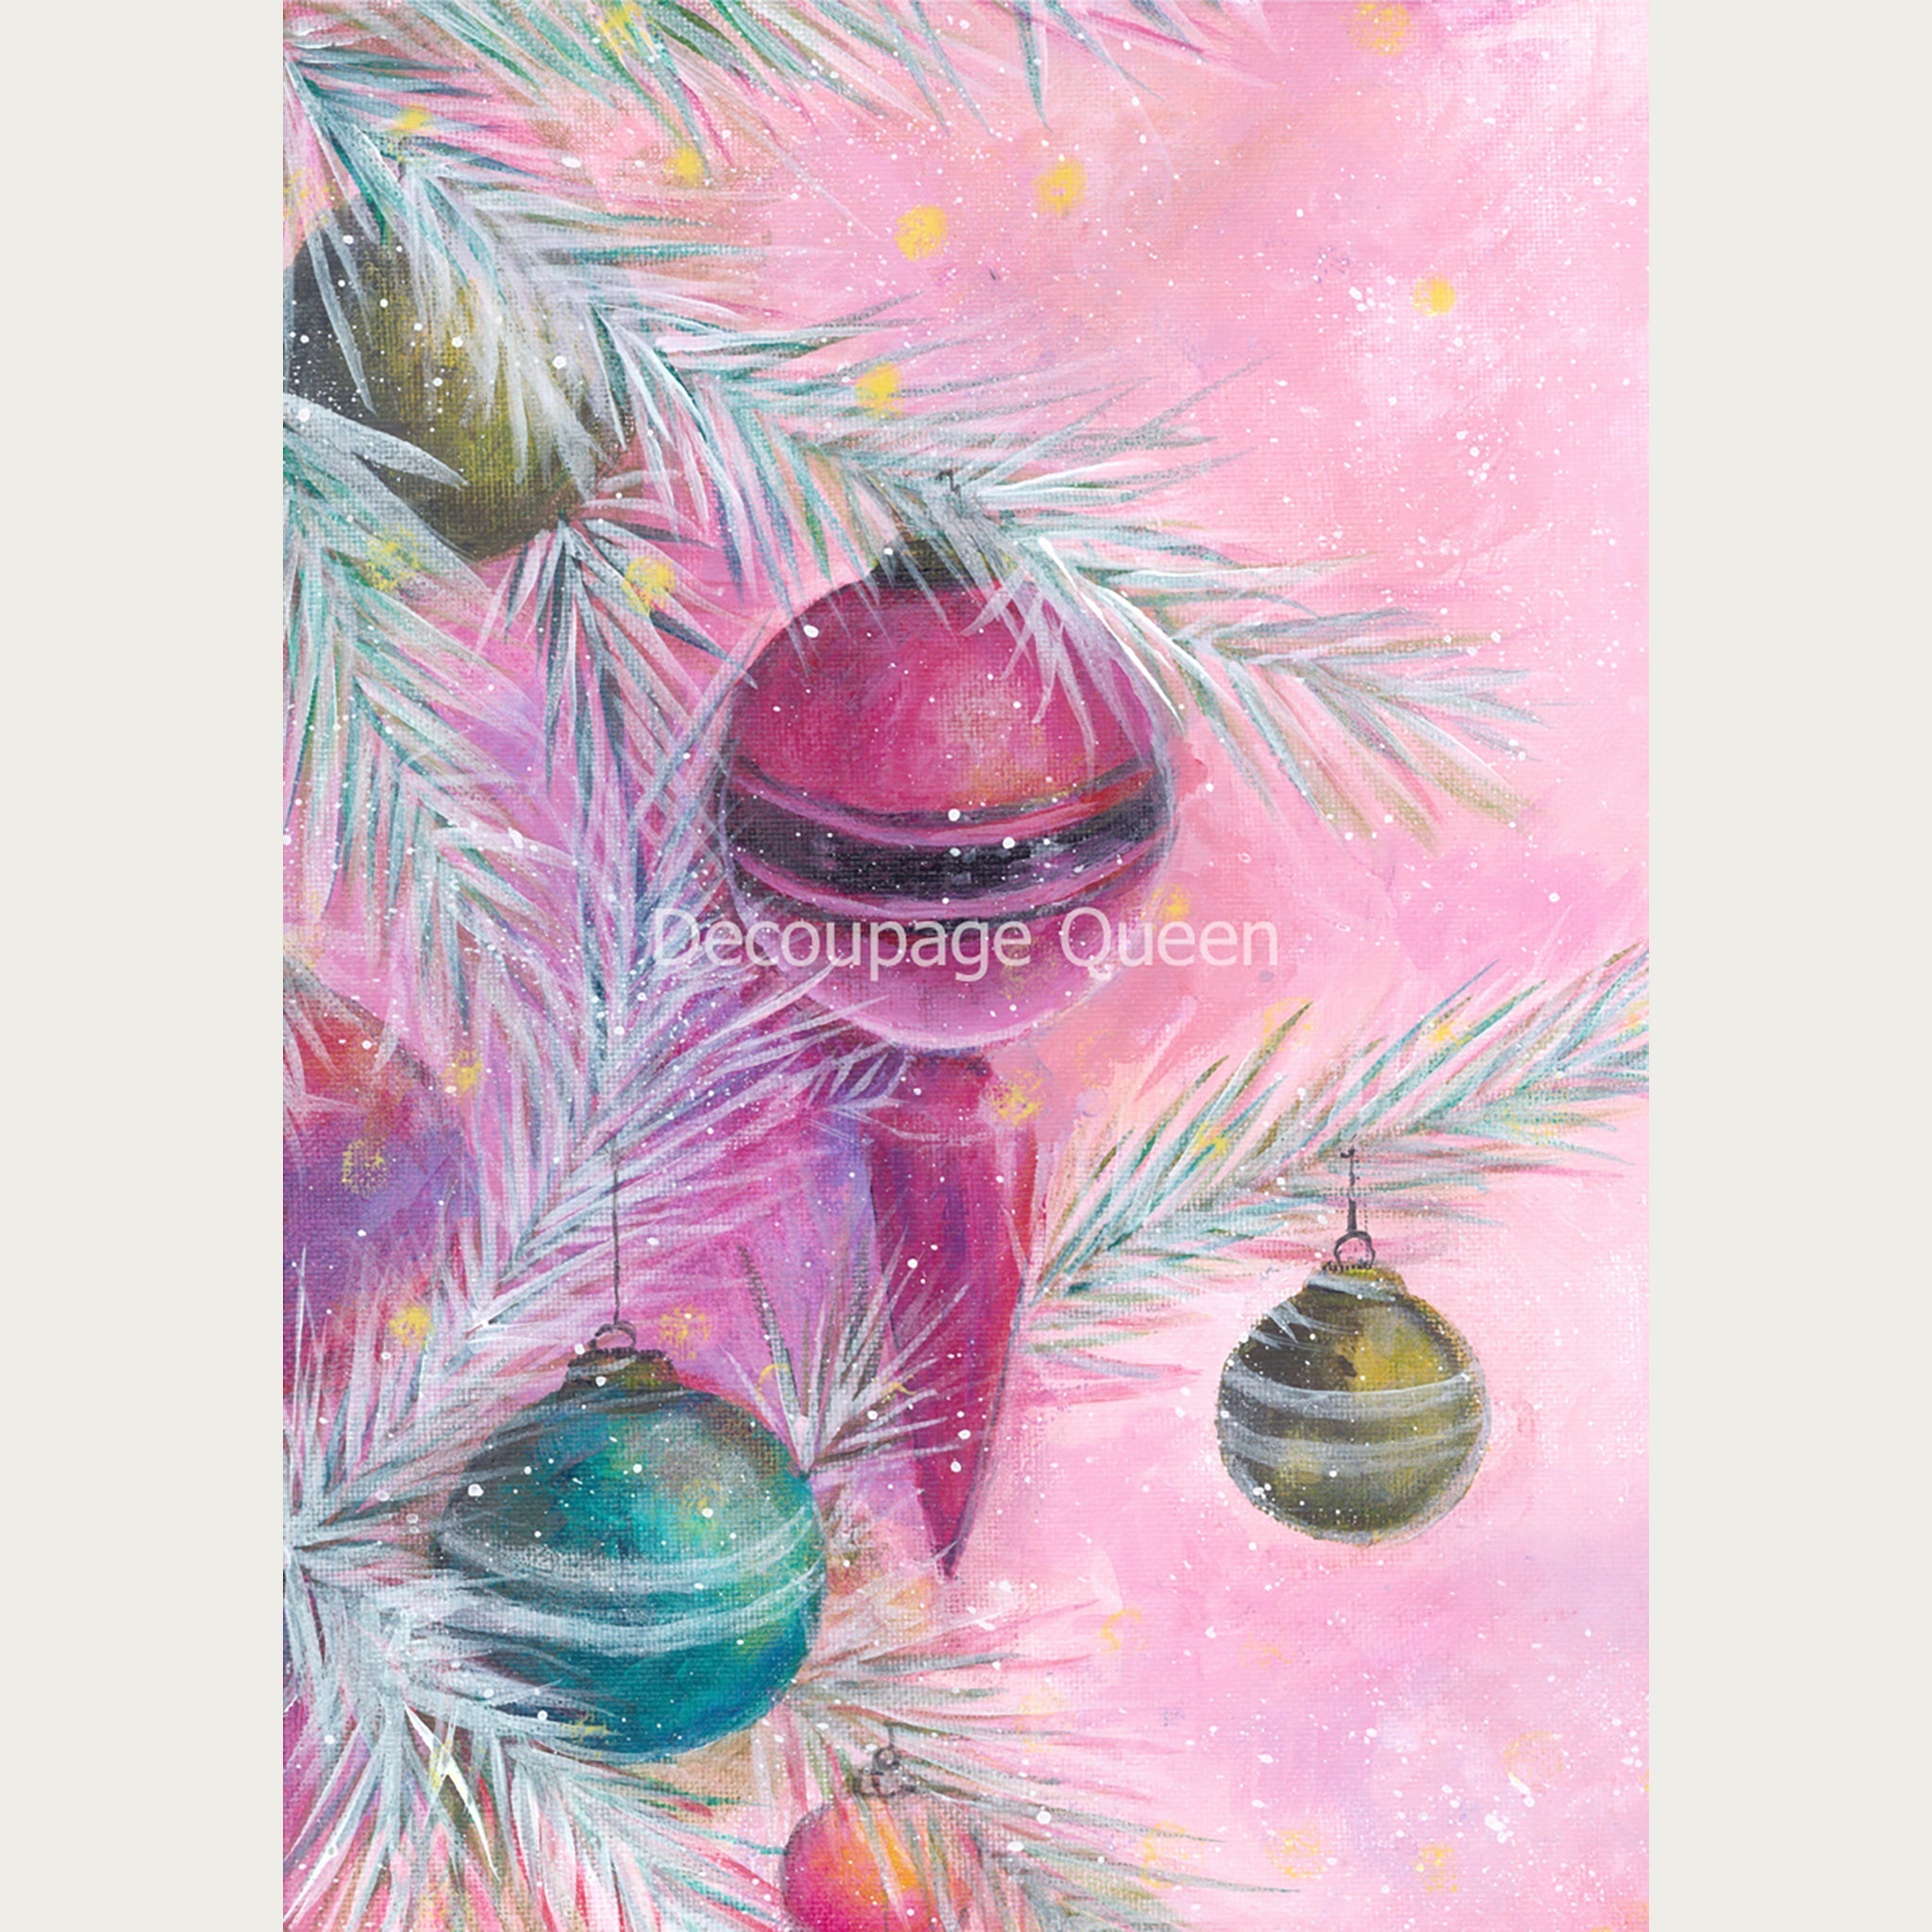 Hand painted style A1 rice paper design of ornaments and on a pine branch on a soft pink background. White borders are on the sides.